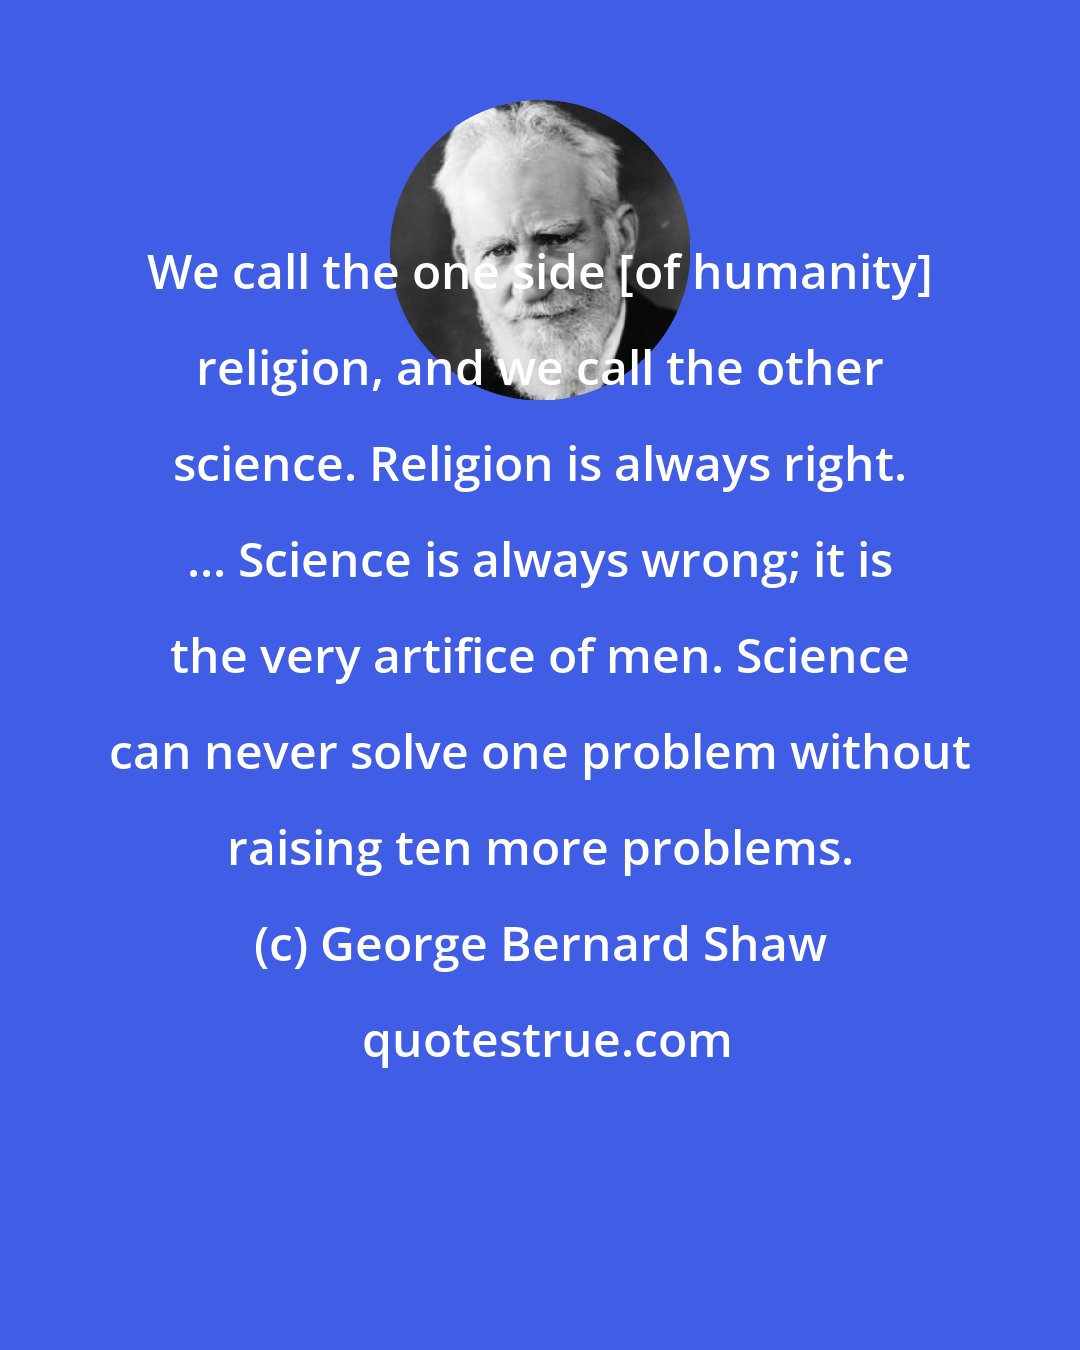 George Bernard Shaw: We call the one side [of humanity] religion, and we call the other science. Religion is always right. ... Science is always wrong; it is the very artifice of men. Science can never solve one problem without raising ten more problems.